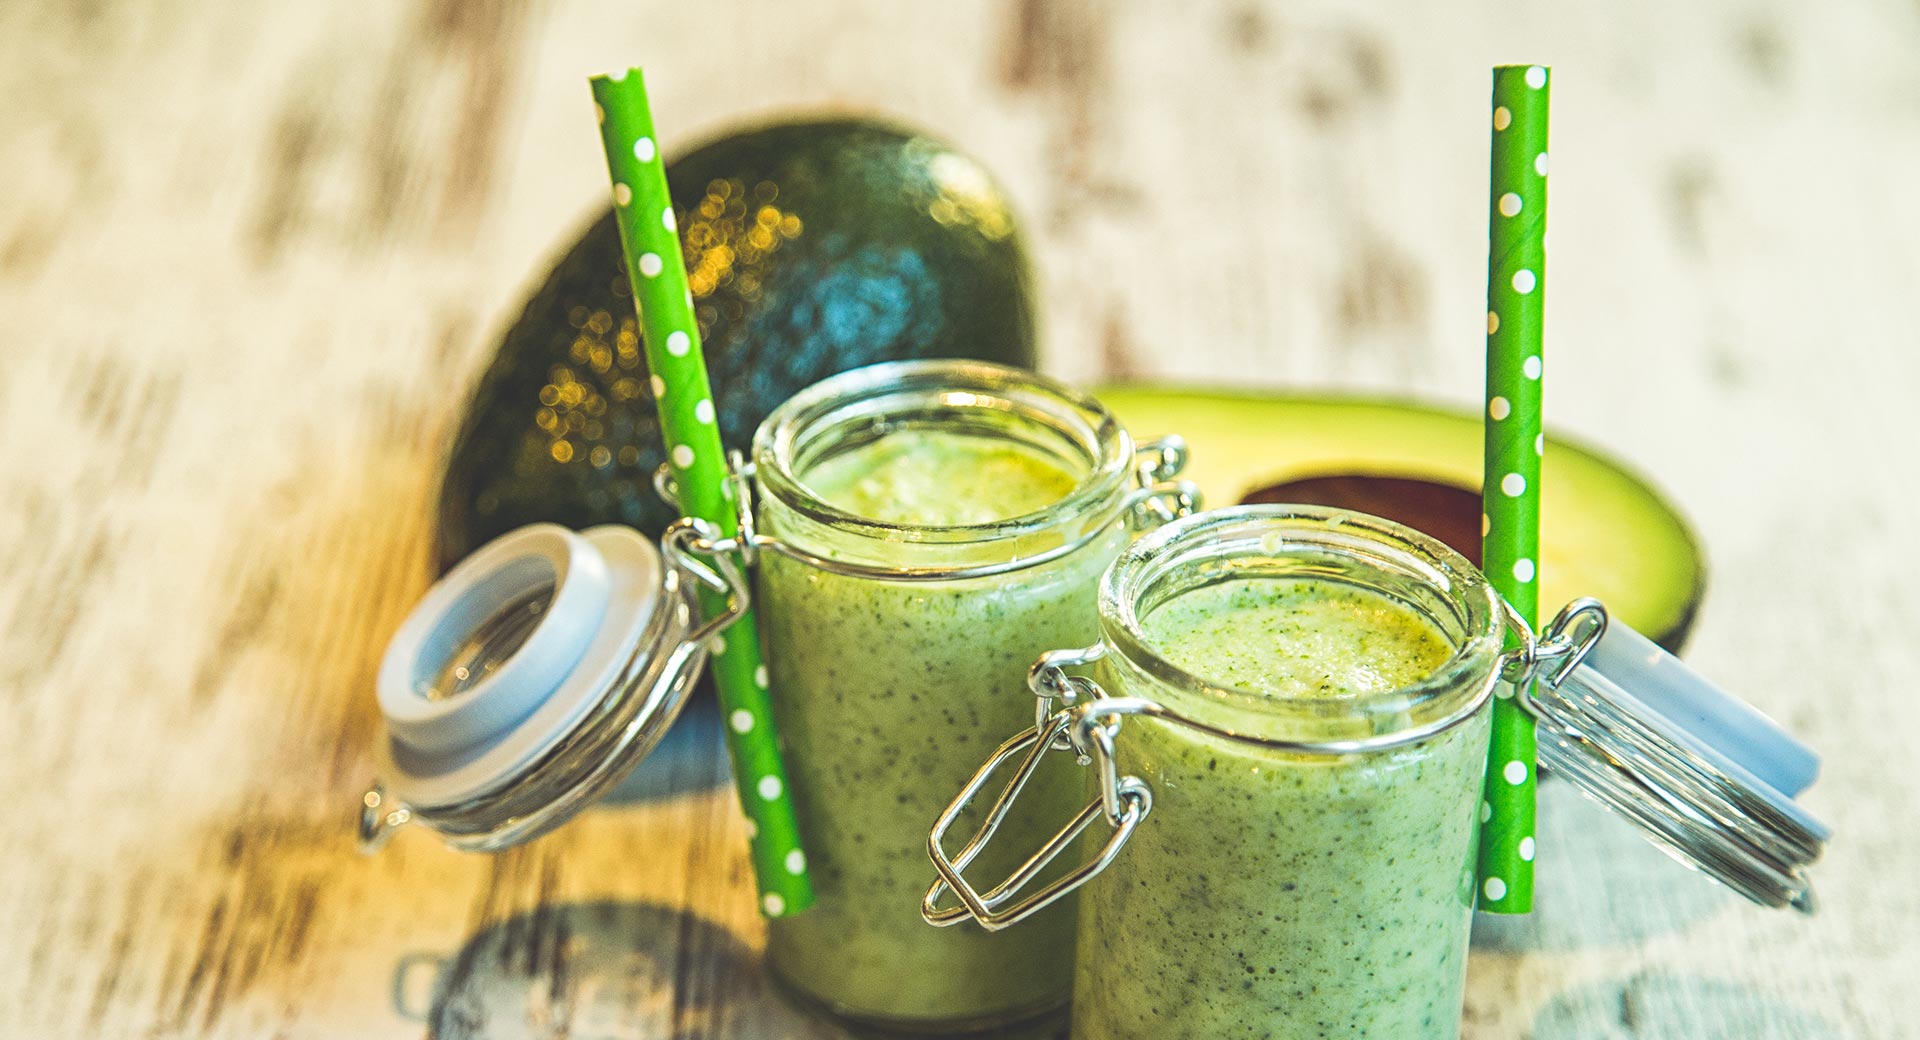 green smoothie in glass jars with green straws, avocado on counter behind glass